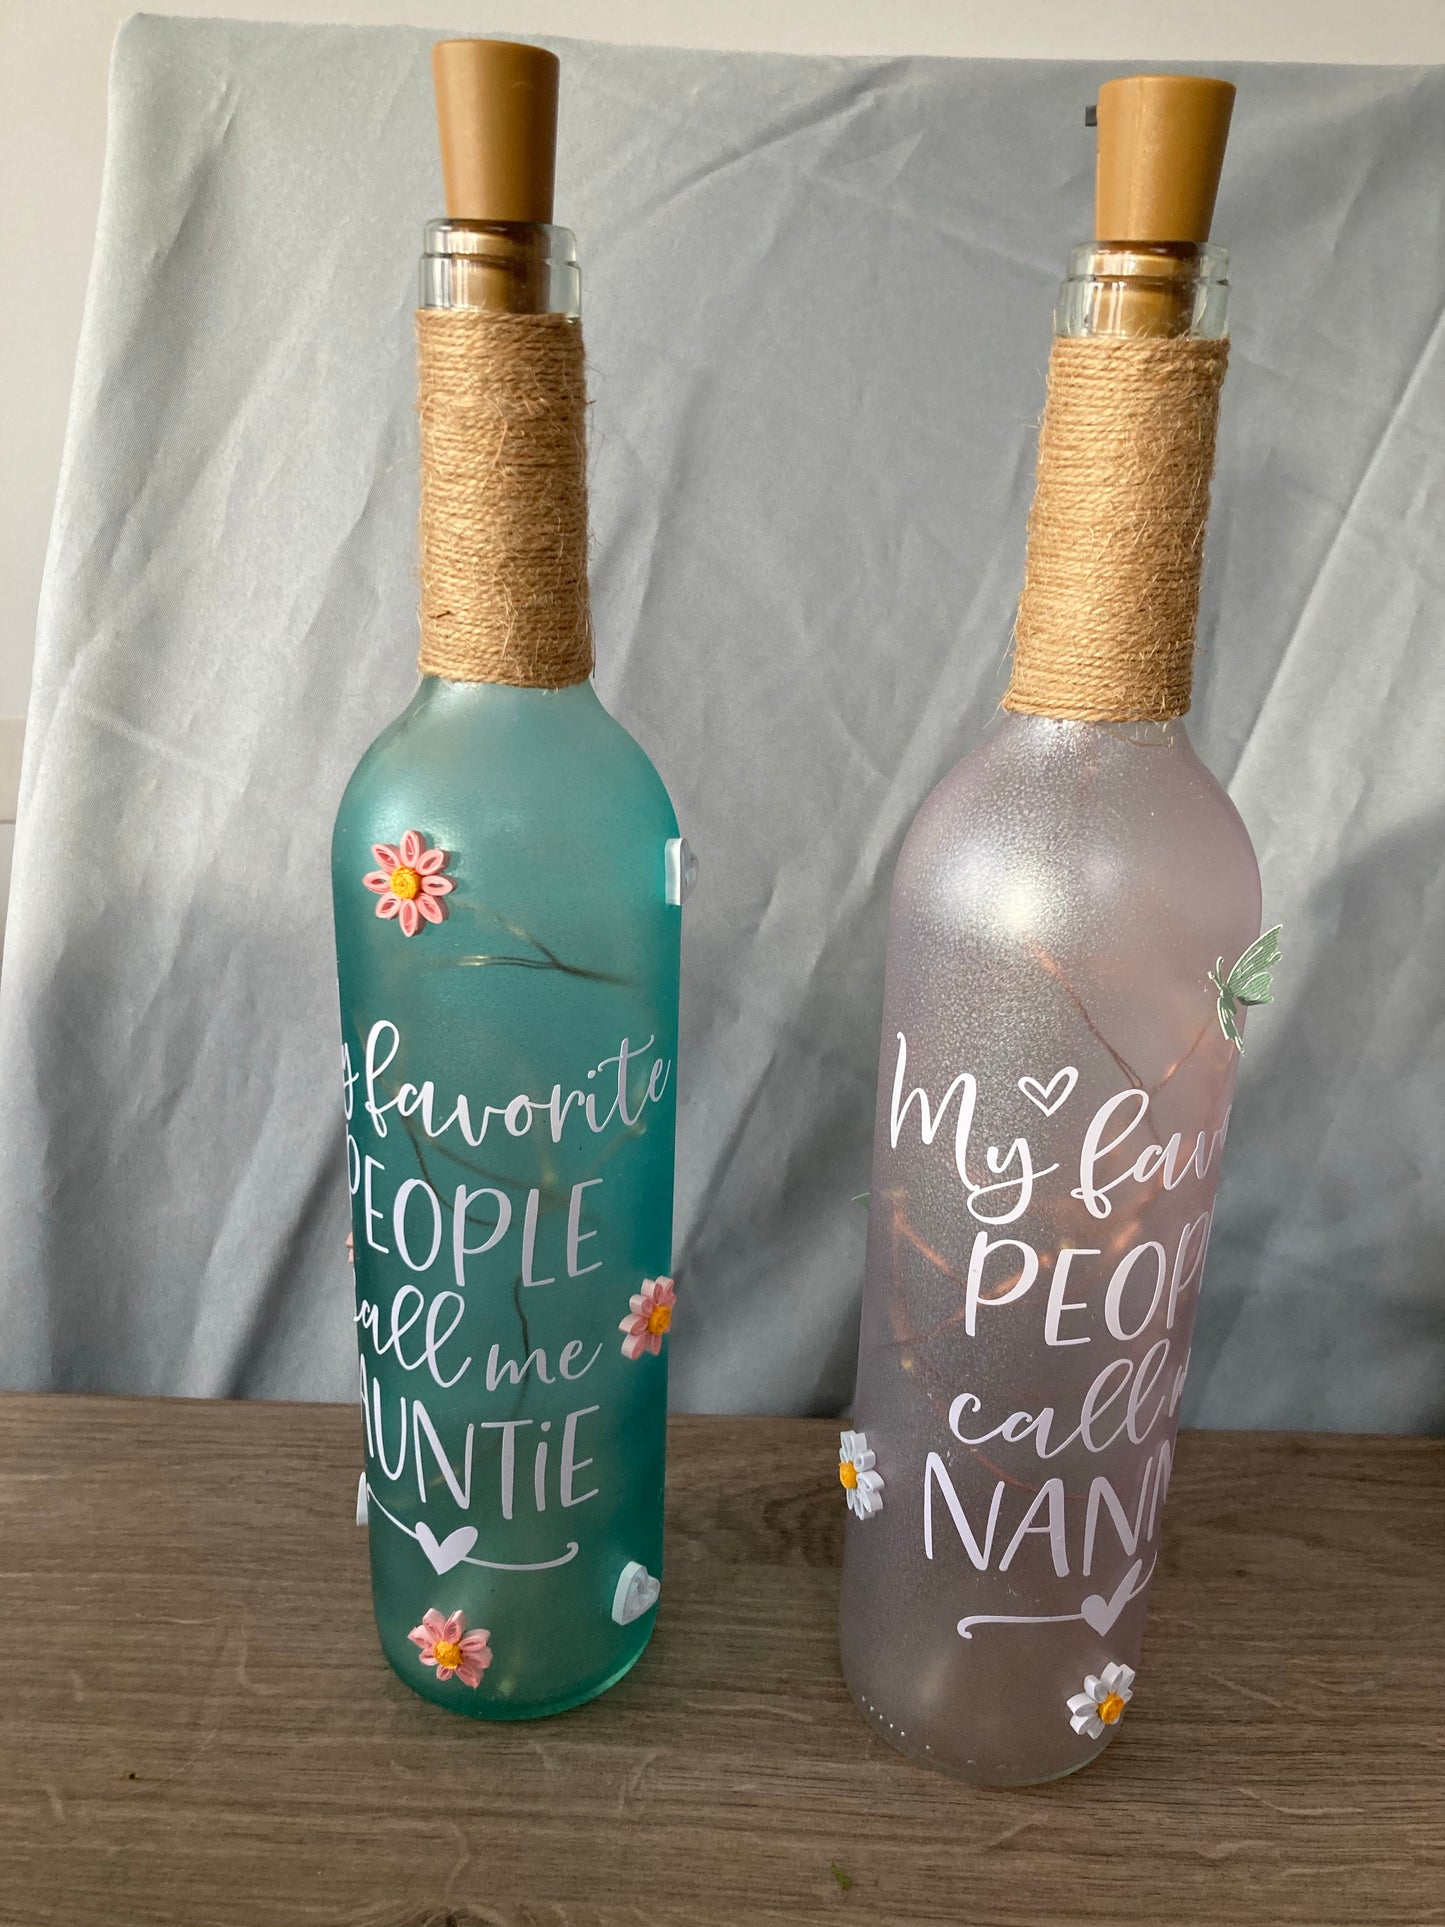 Light up bottle with wording